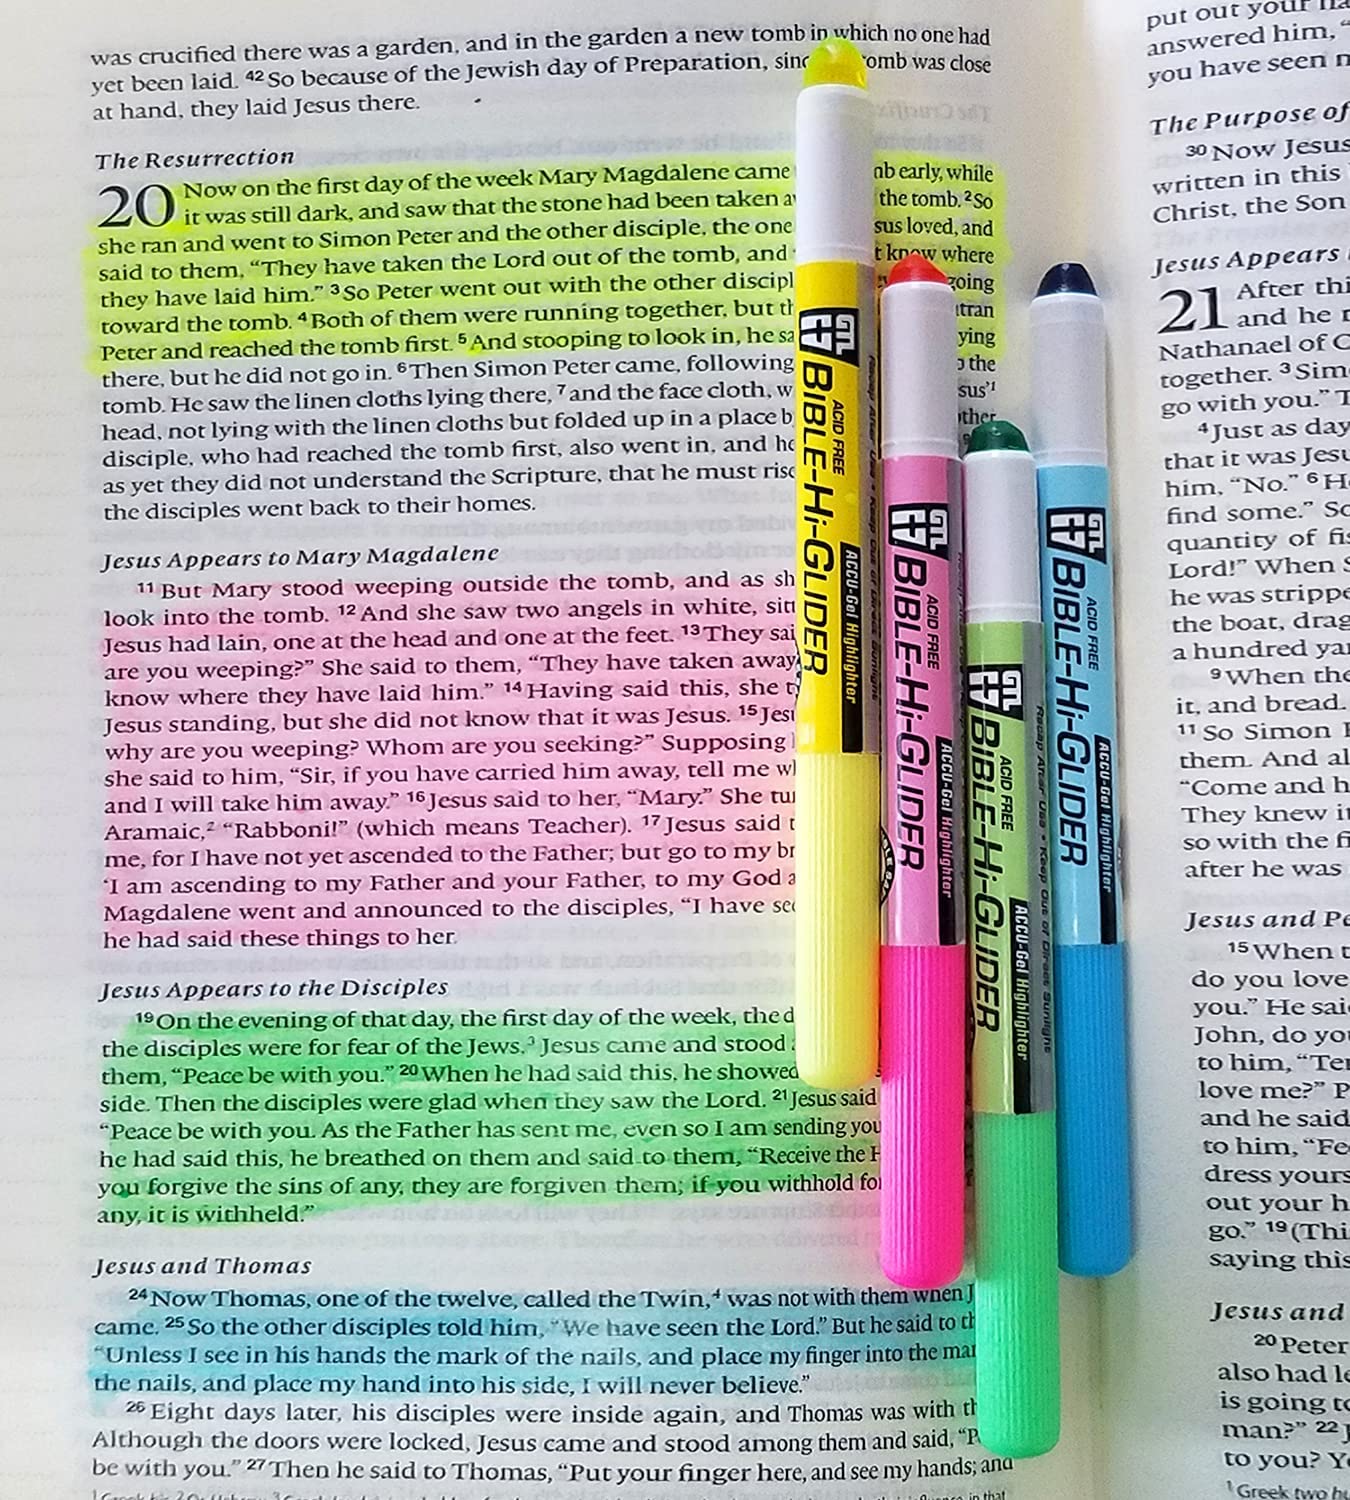 Accu-Gel Bible-Hi-Glider Inductive Bible Study Set | No Bleed Solid Gel Highlighter | No Smearing or Fading | Long Lasting Bright Translucent Colors (Set of 10)